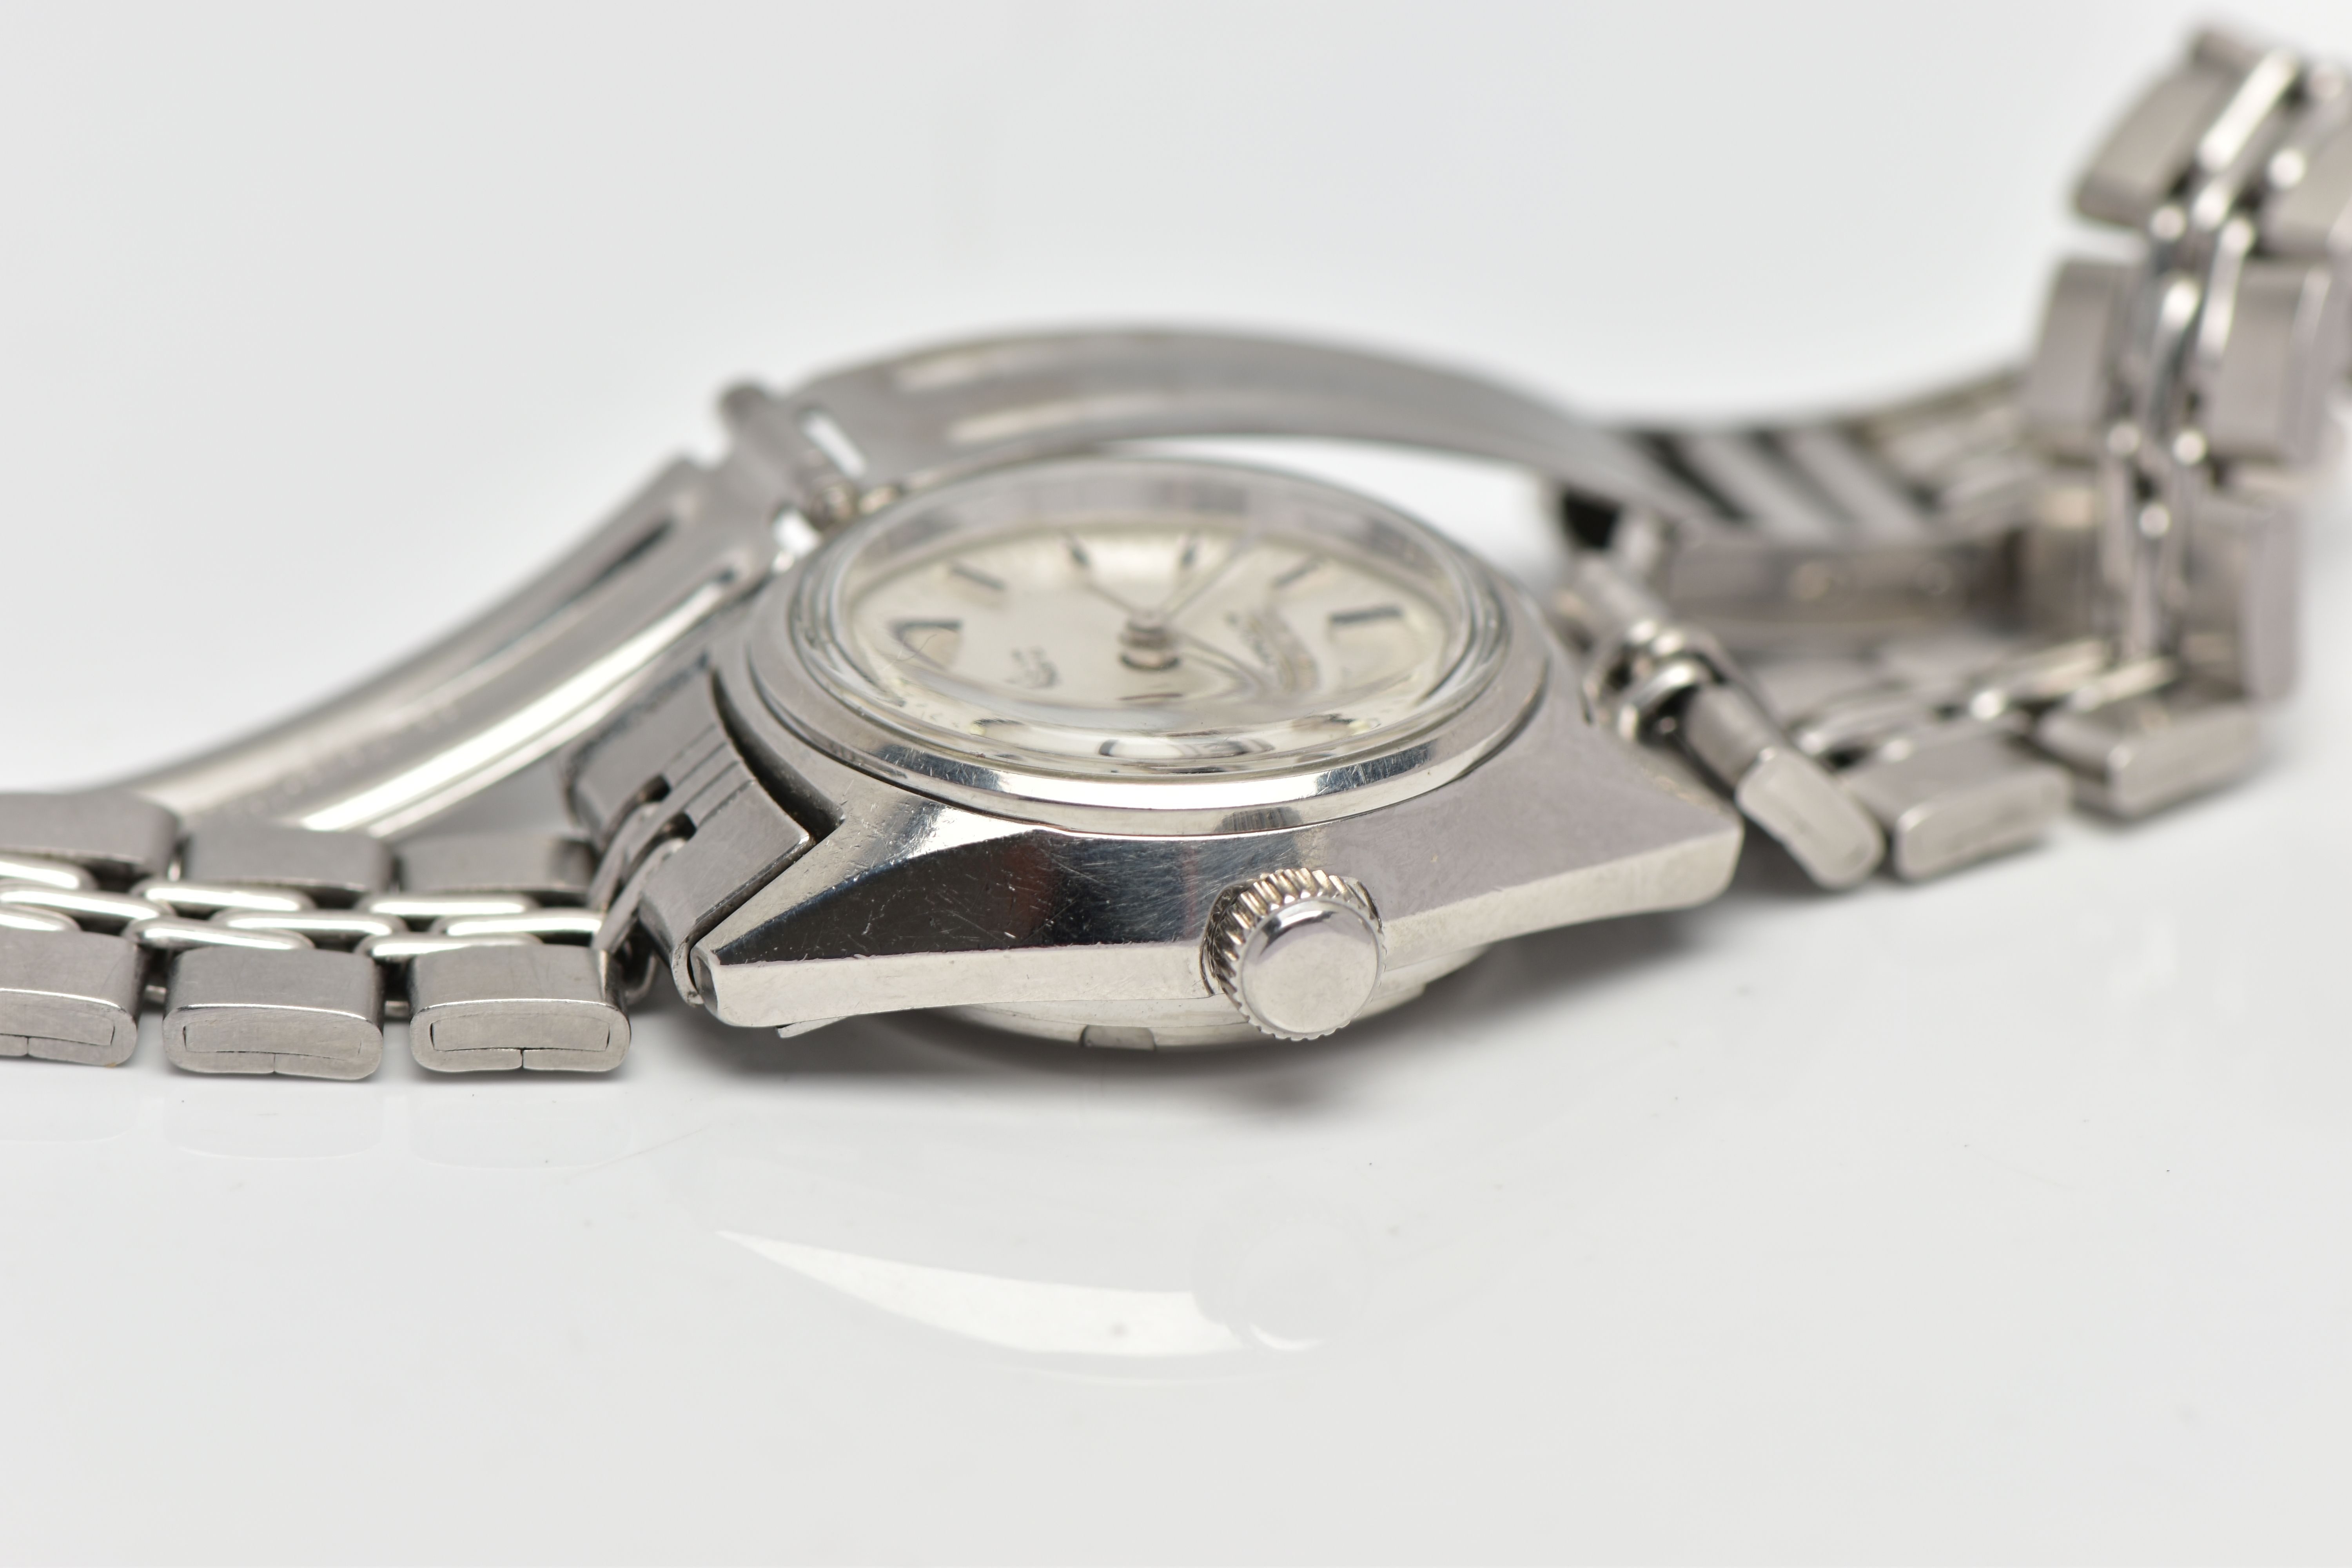 A LADIES 'SEIKO AUTOMATIC' WRISTWATCH, round silver dial signed 'Seiko automatic', day/date window - Image 6 of 6